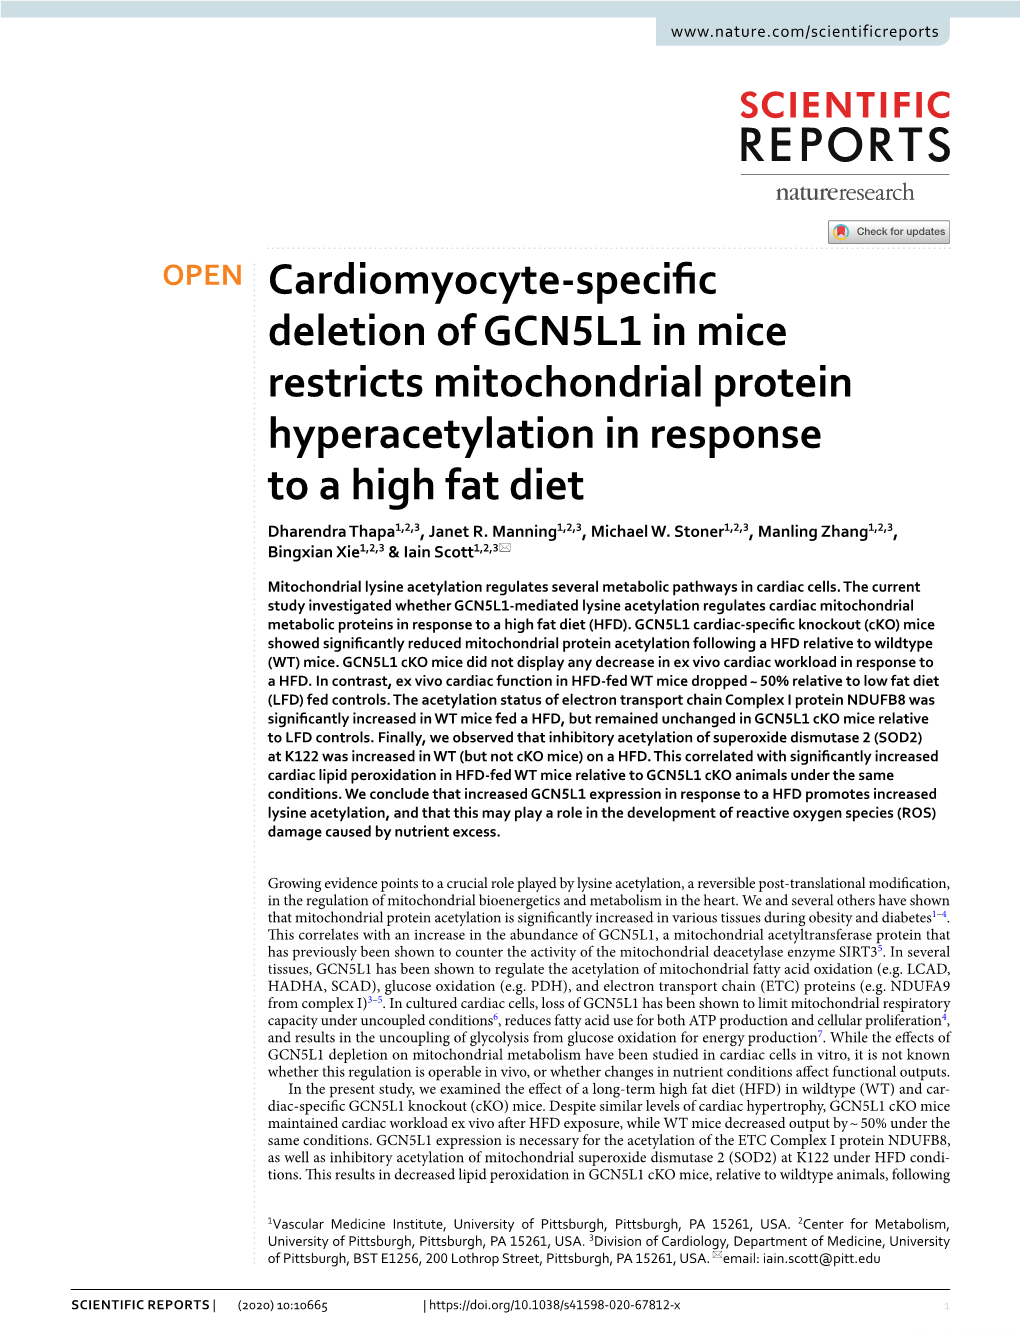 Cardiomyocyte-Specific Deletion of GCN5L1 in Mice Restricts